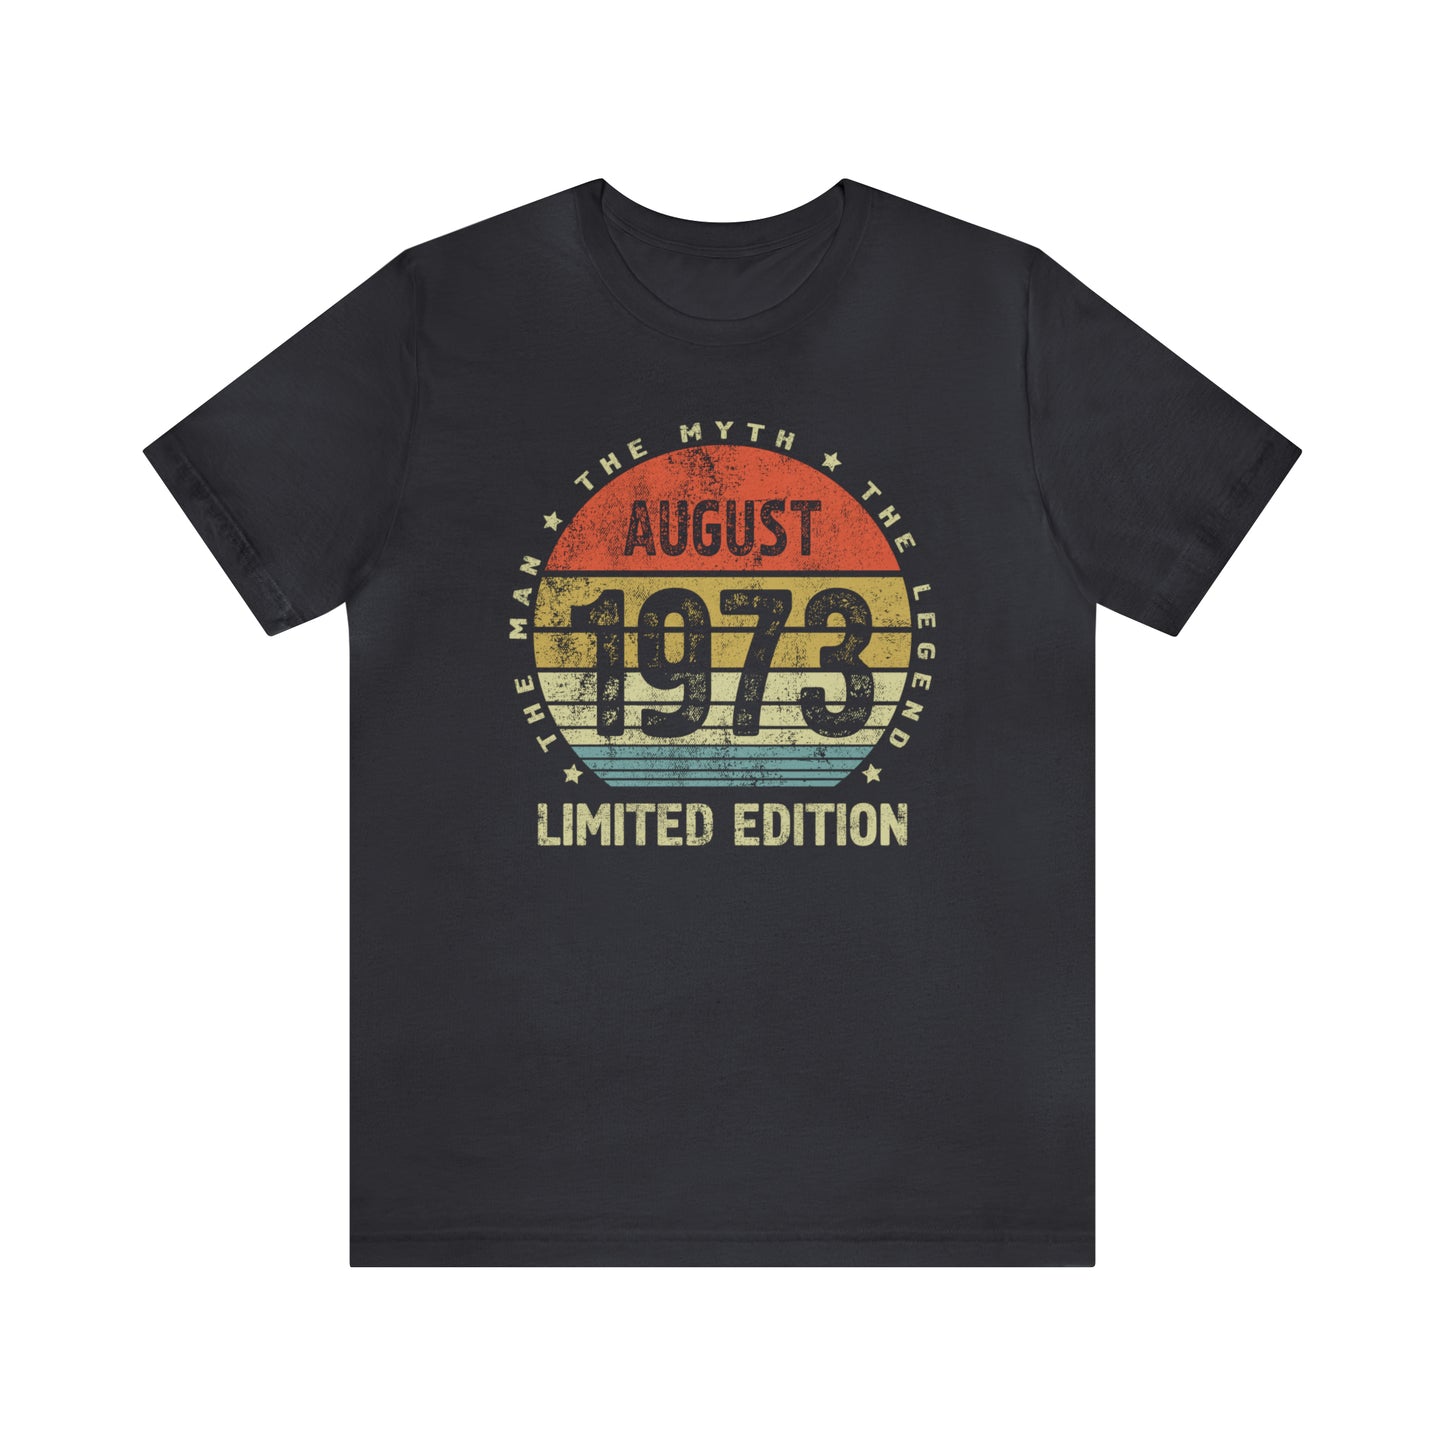 August 1973 birthday shirt for men or husband, Gift shirt for father or brother